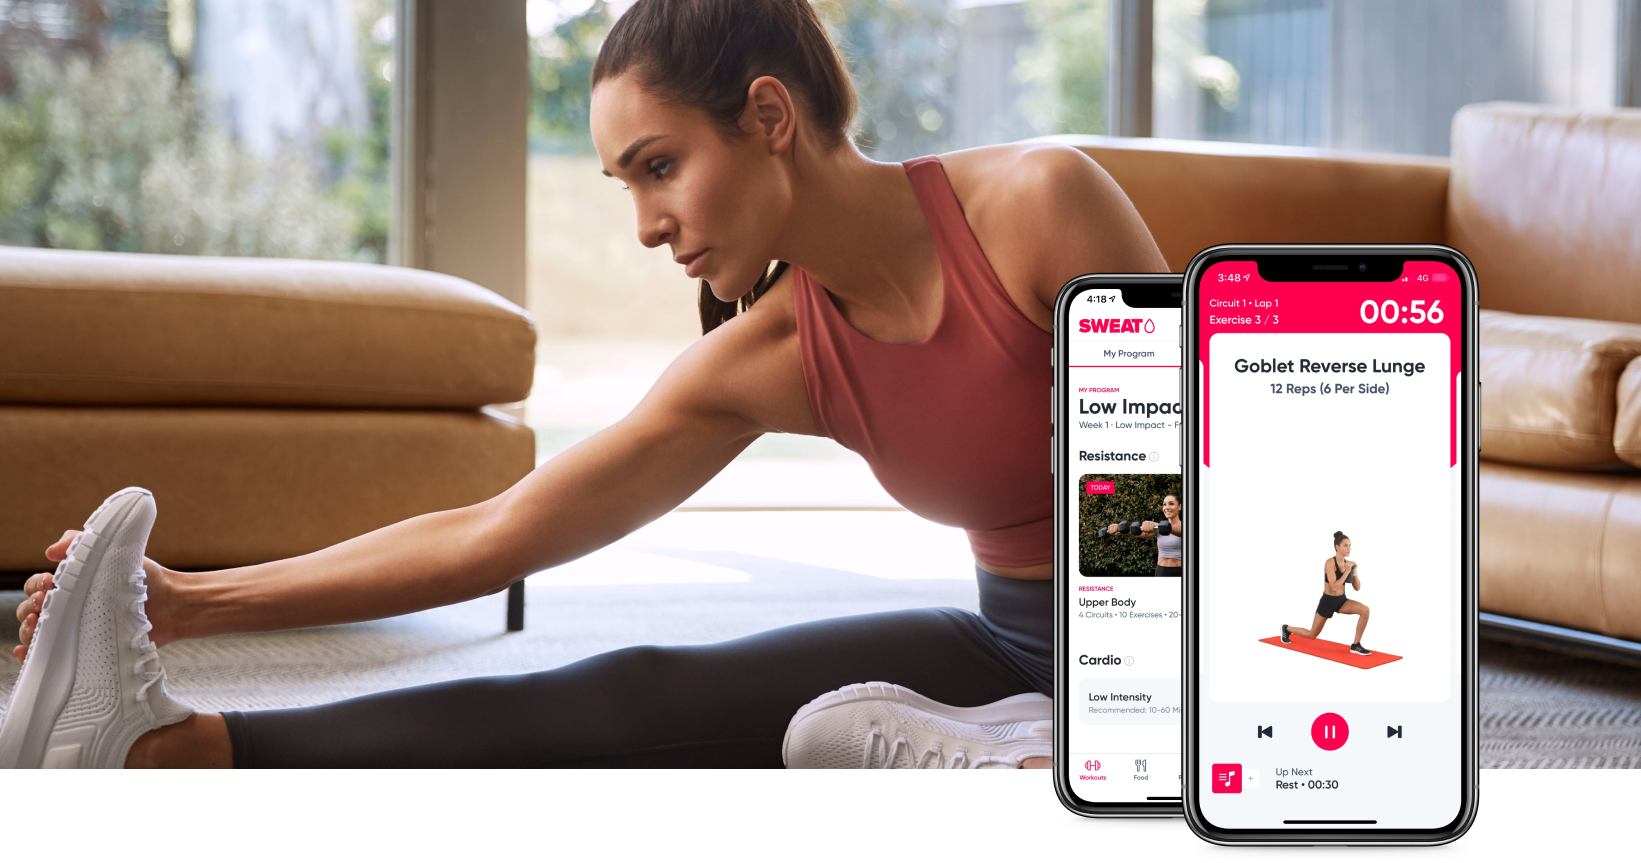 Developing a headless CMS for the world’s largest female fitness community